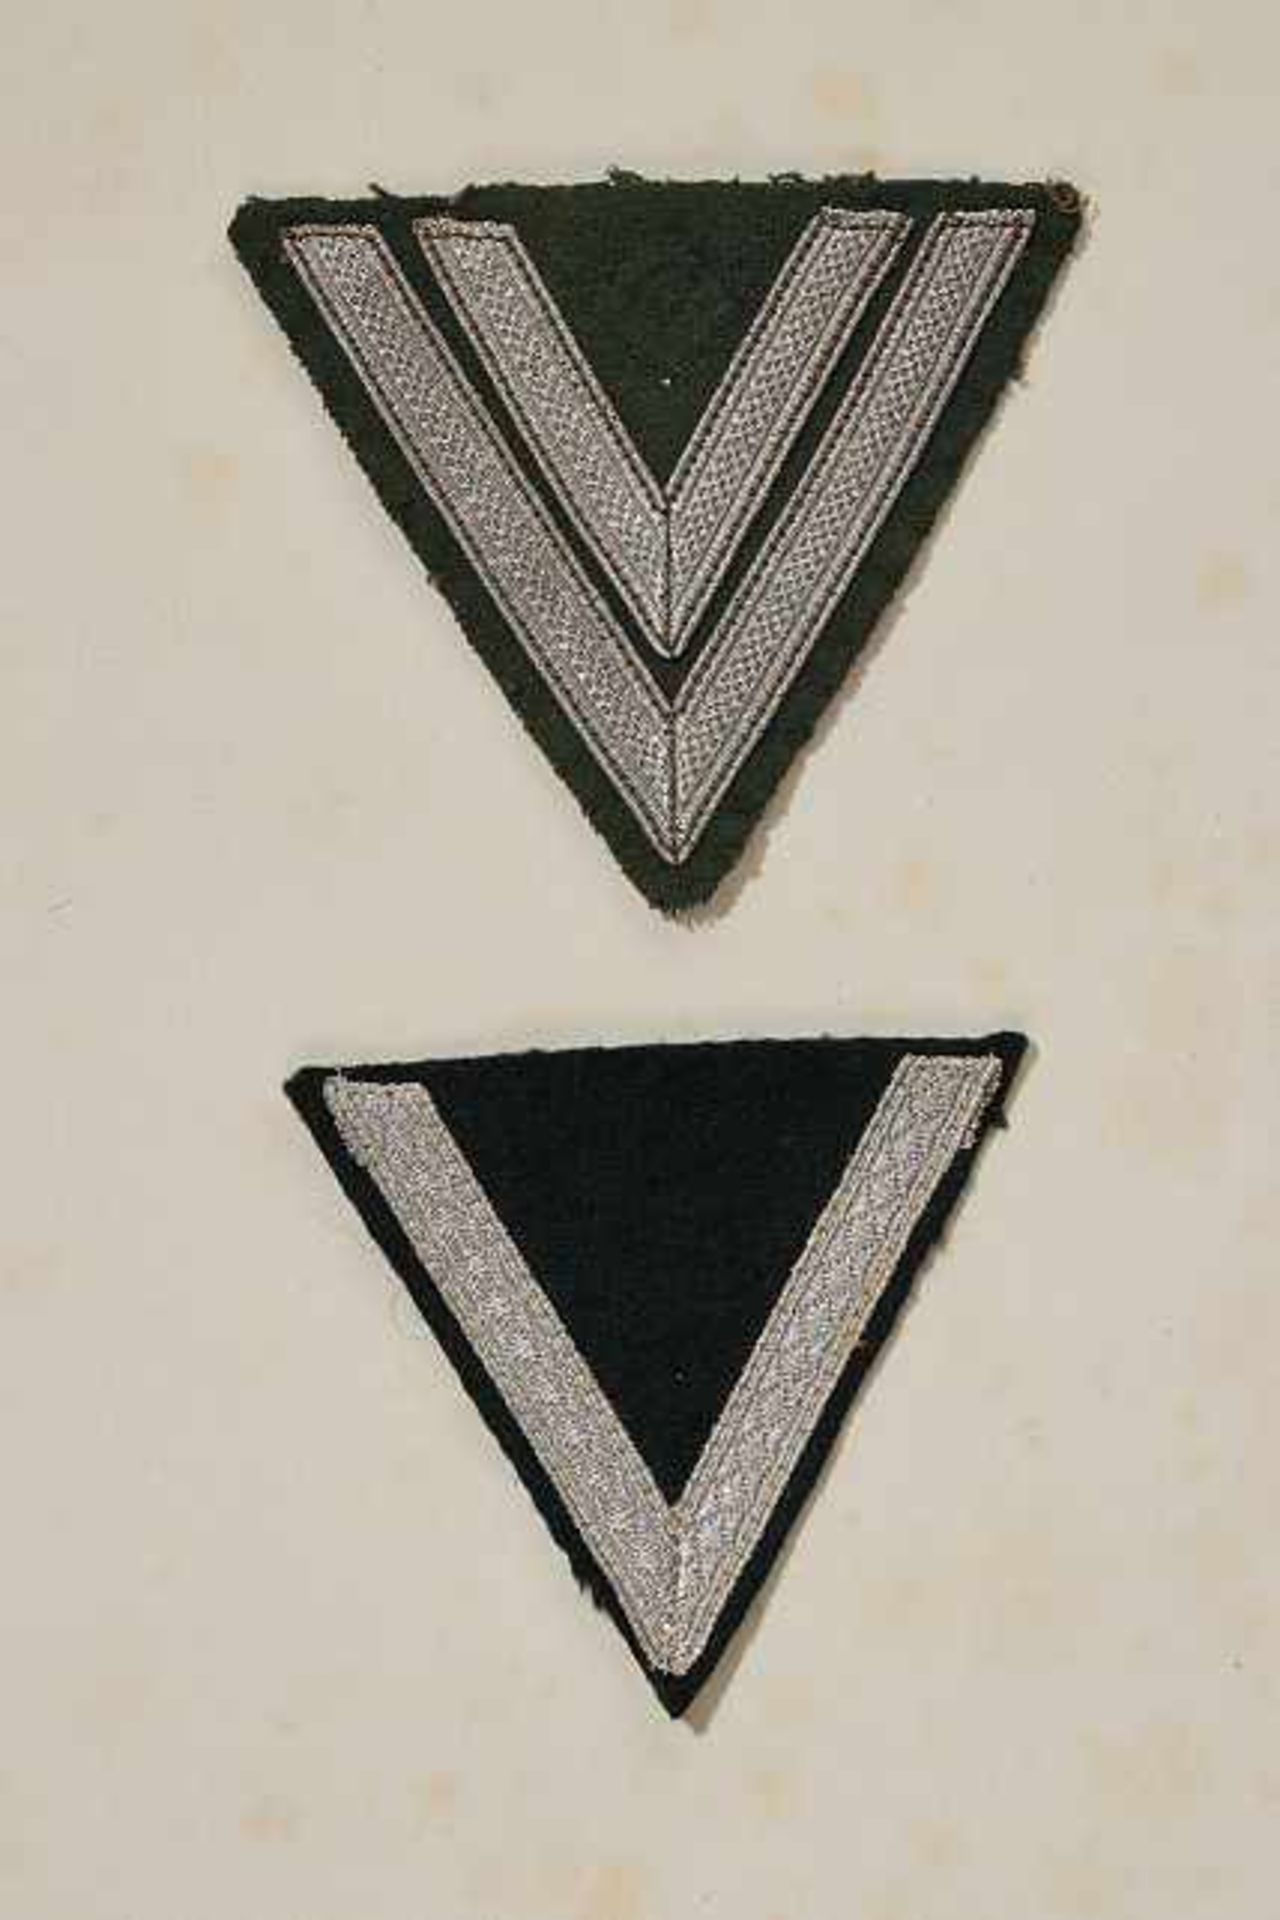 Deutsches Reich 1933 - 1945 - Heer - Uniformen : Army Corporal Sleeve Chevrons.Lot consists of two